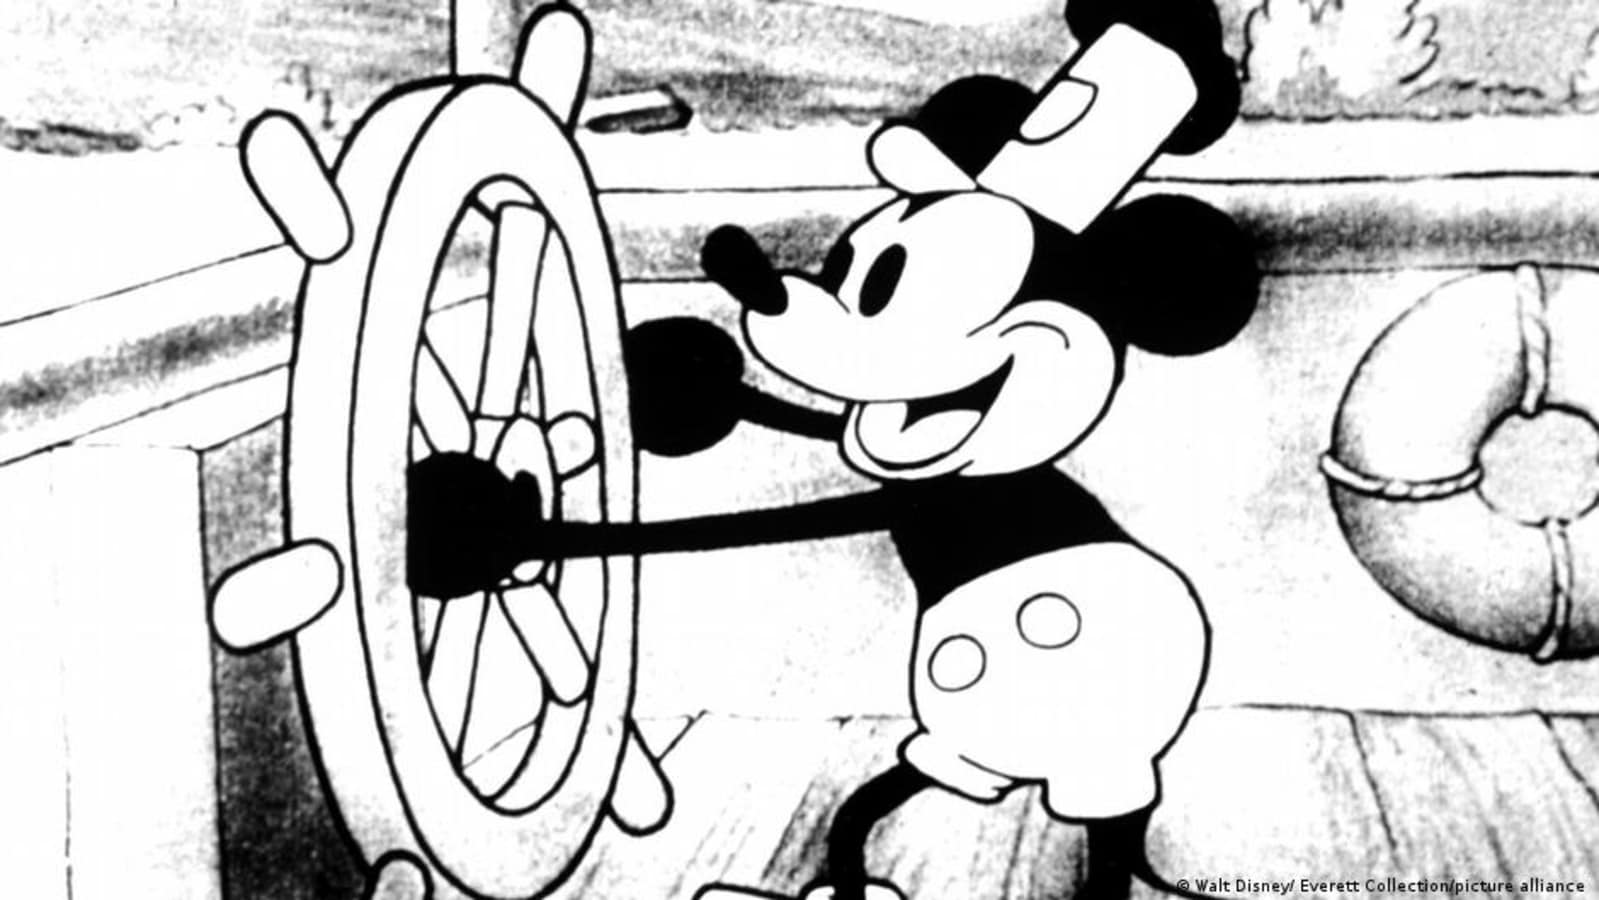 Mickey Mouse in Steamboat Willie version